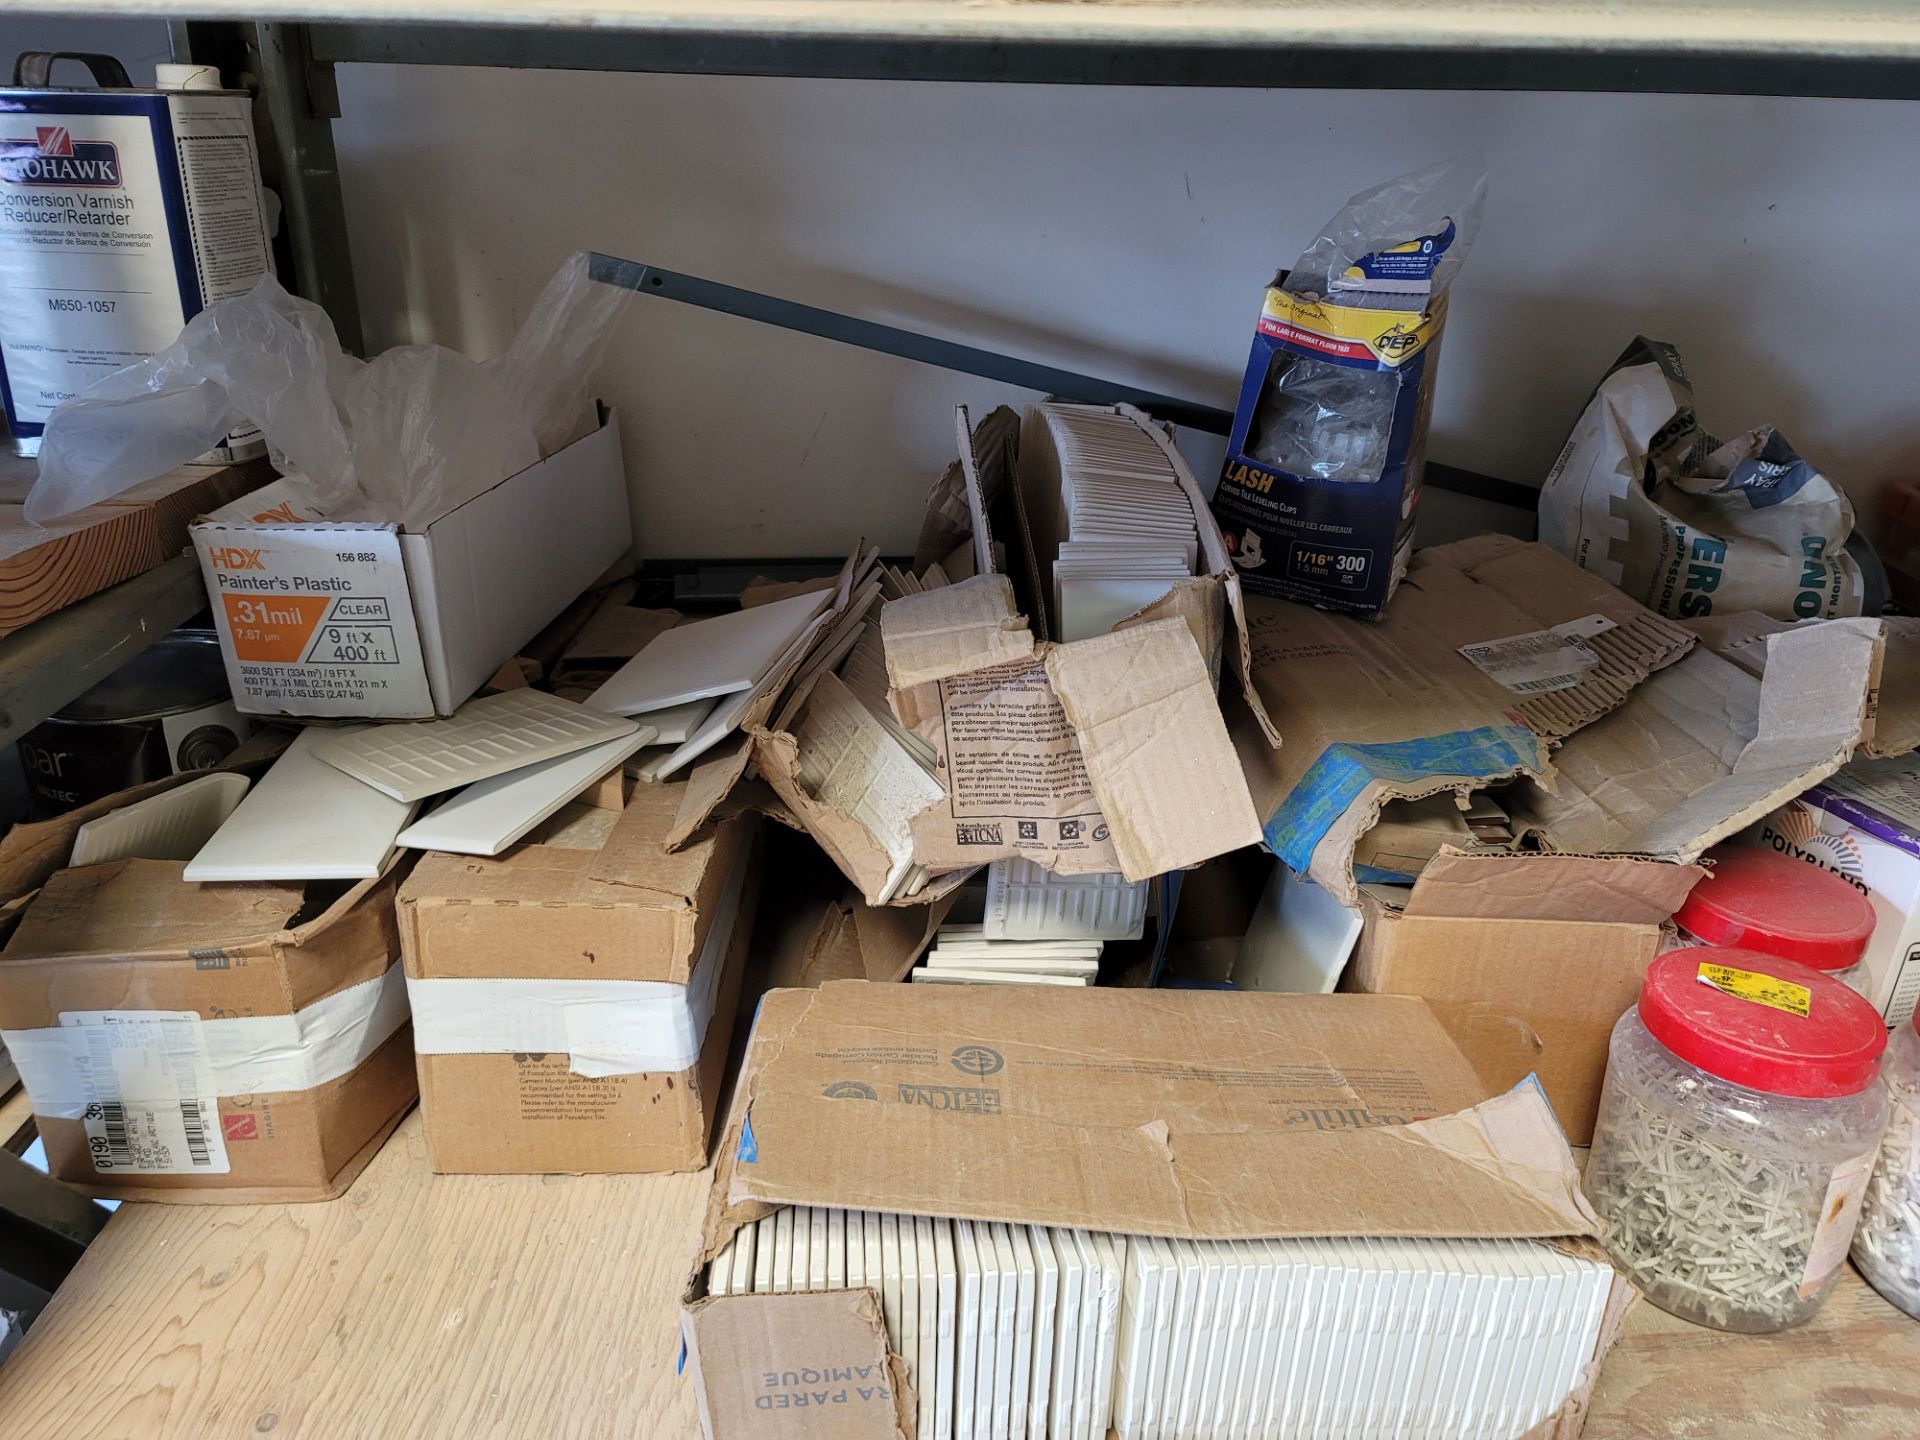 LOT - CONTENTS OF 11' SHELF FULL OF TILE AND TILE INSTALLATION ITEMS (LOCATION: SAN DIEGO, CA) - Image 6 of 6